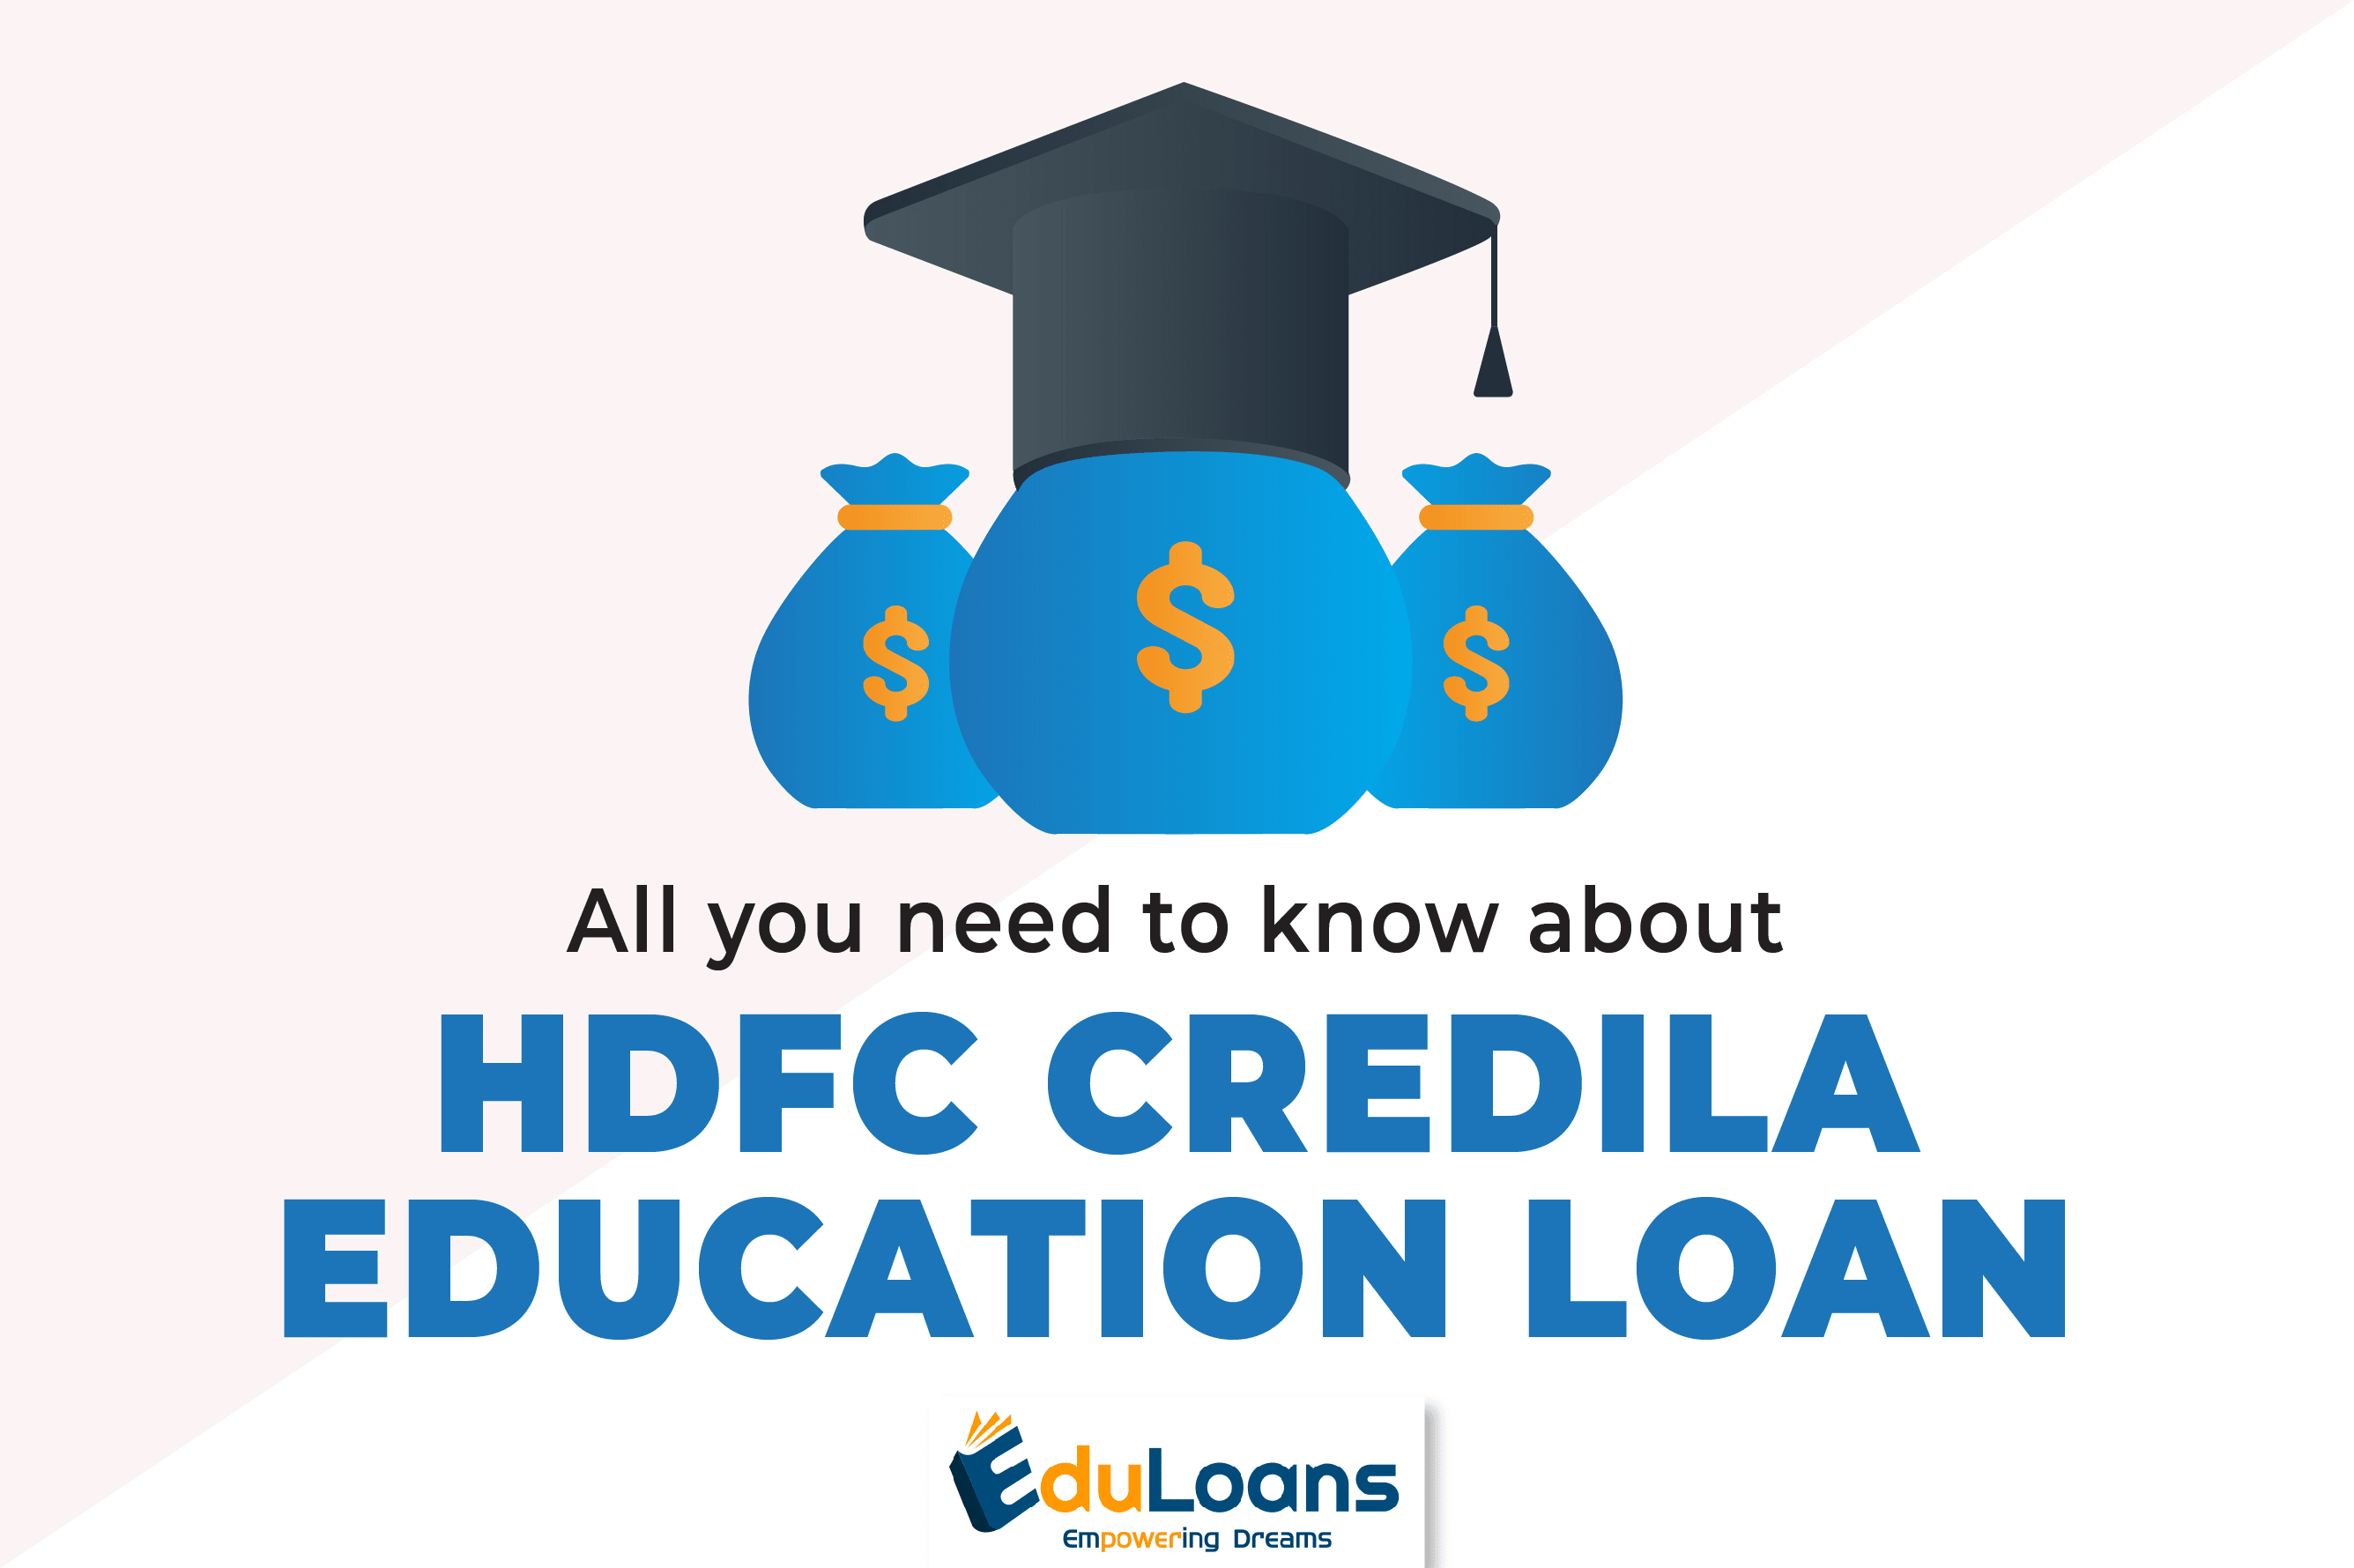 All you Need to Know About HDFC Credila Education Loan